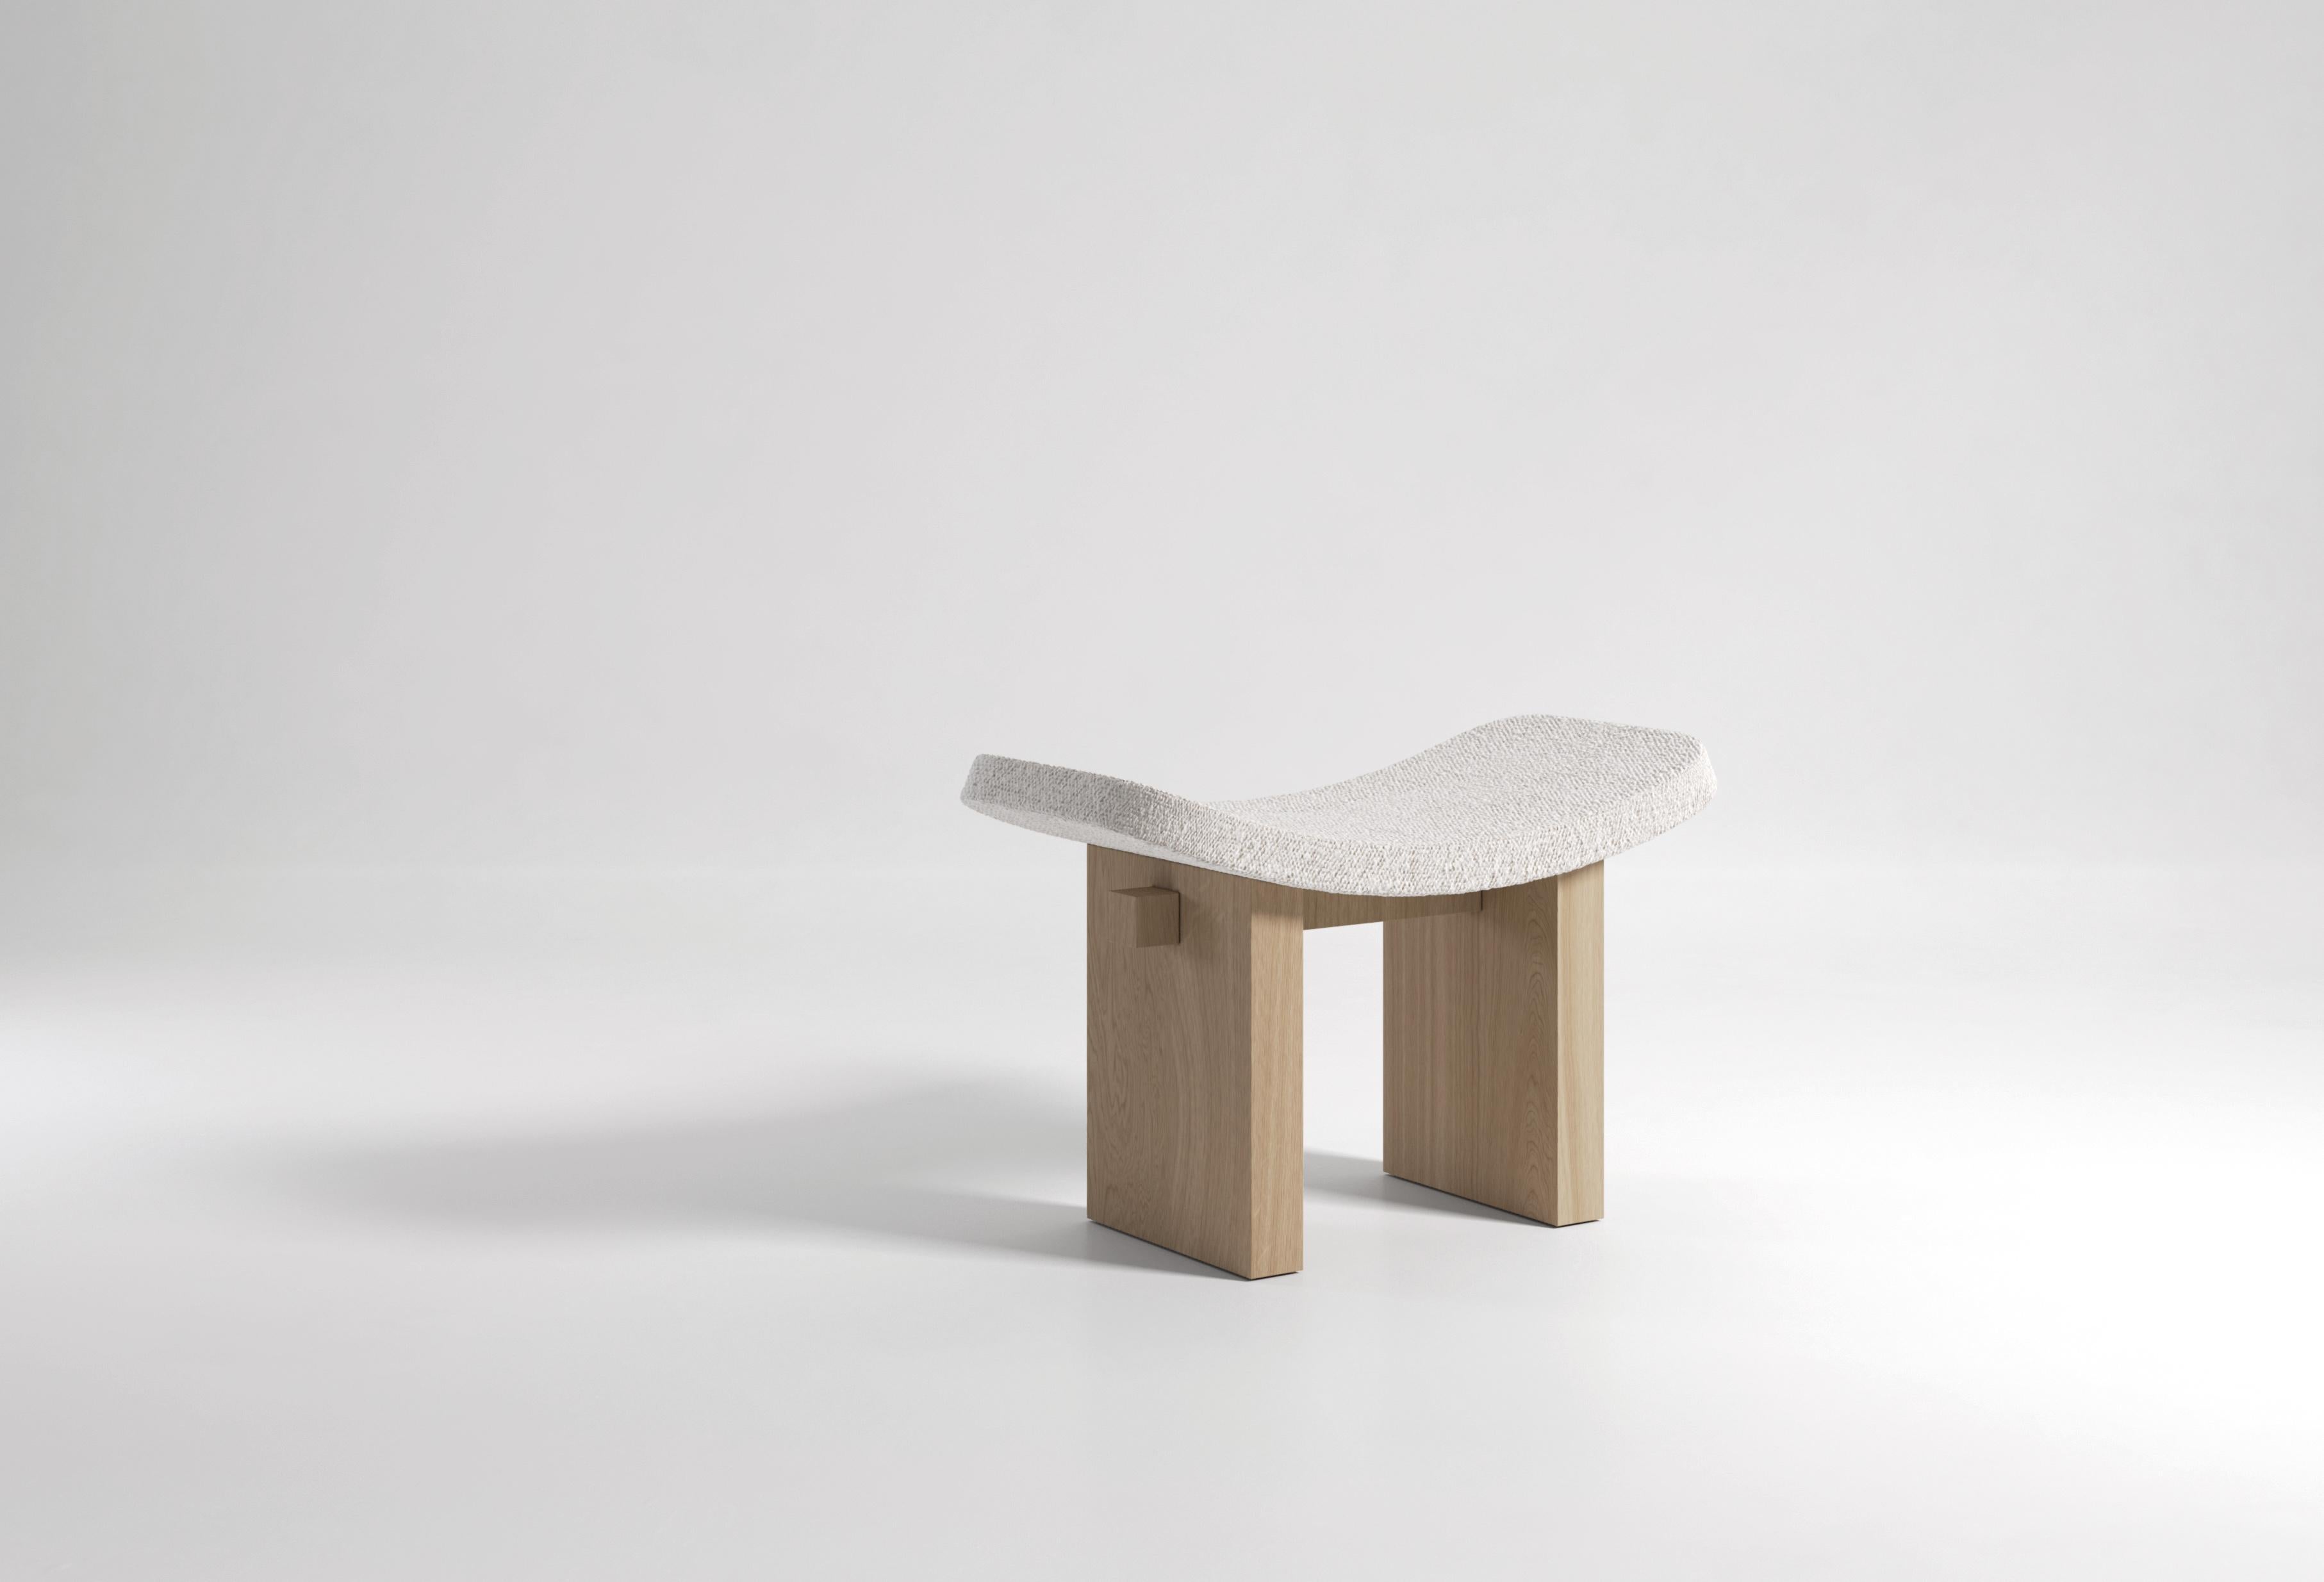 The Nara stool is a minimal one-seater stool with references to ancient Japanese architecture and forms. Nara is the perfect piece to sit in the corner of a room until needed, her combination of strong straight lines and soft, curved upholstery give